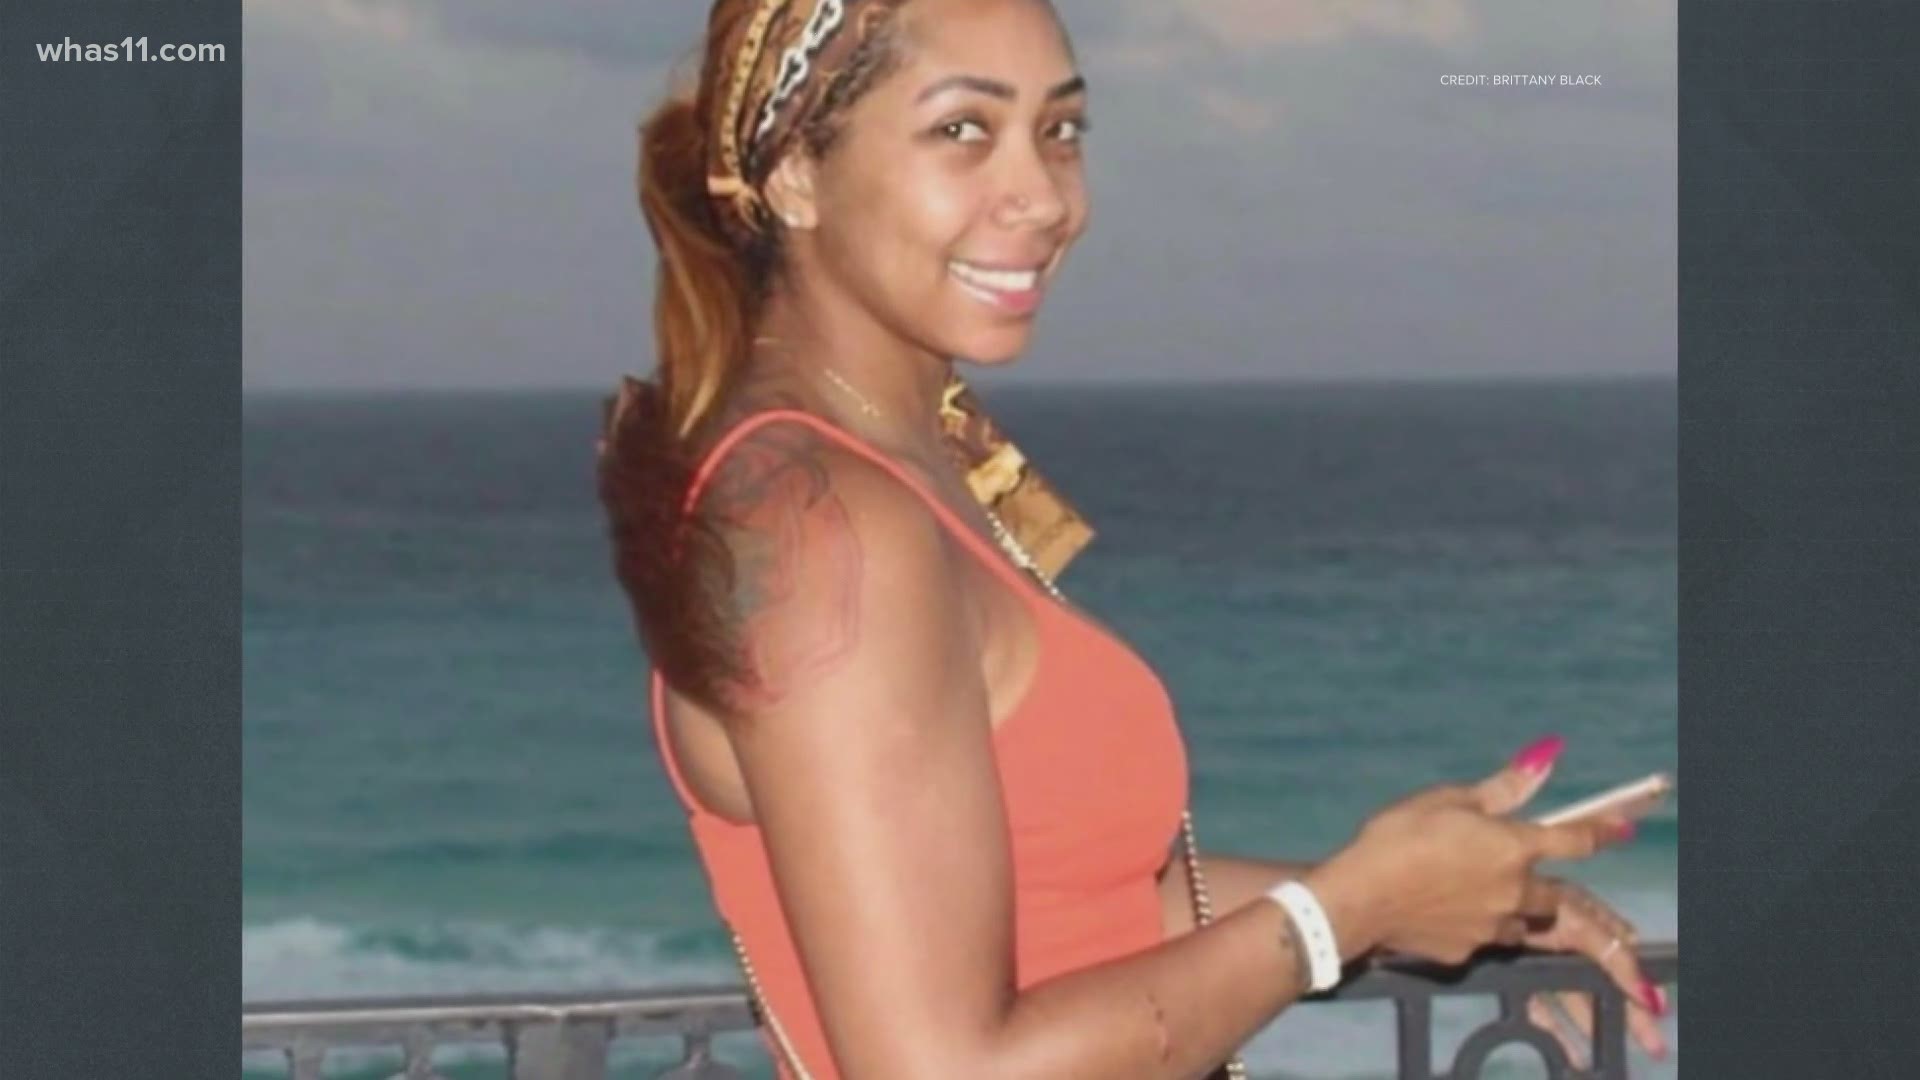 I Just Want To Be Killed Kasmira Nash killed at Vibes nightclub, worked there, Friends say |  whas11.com